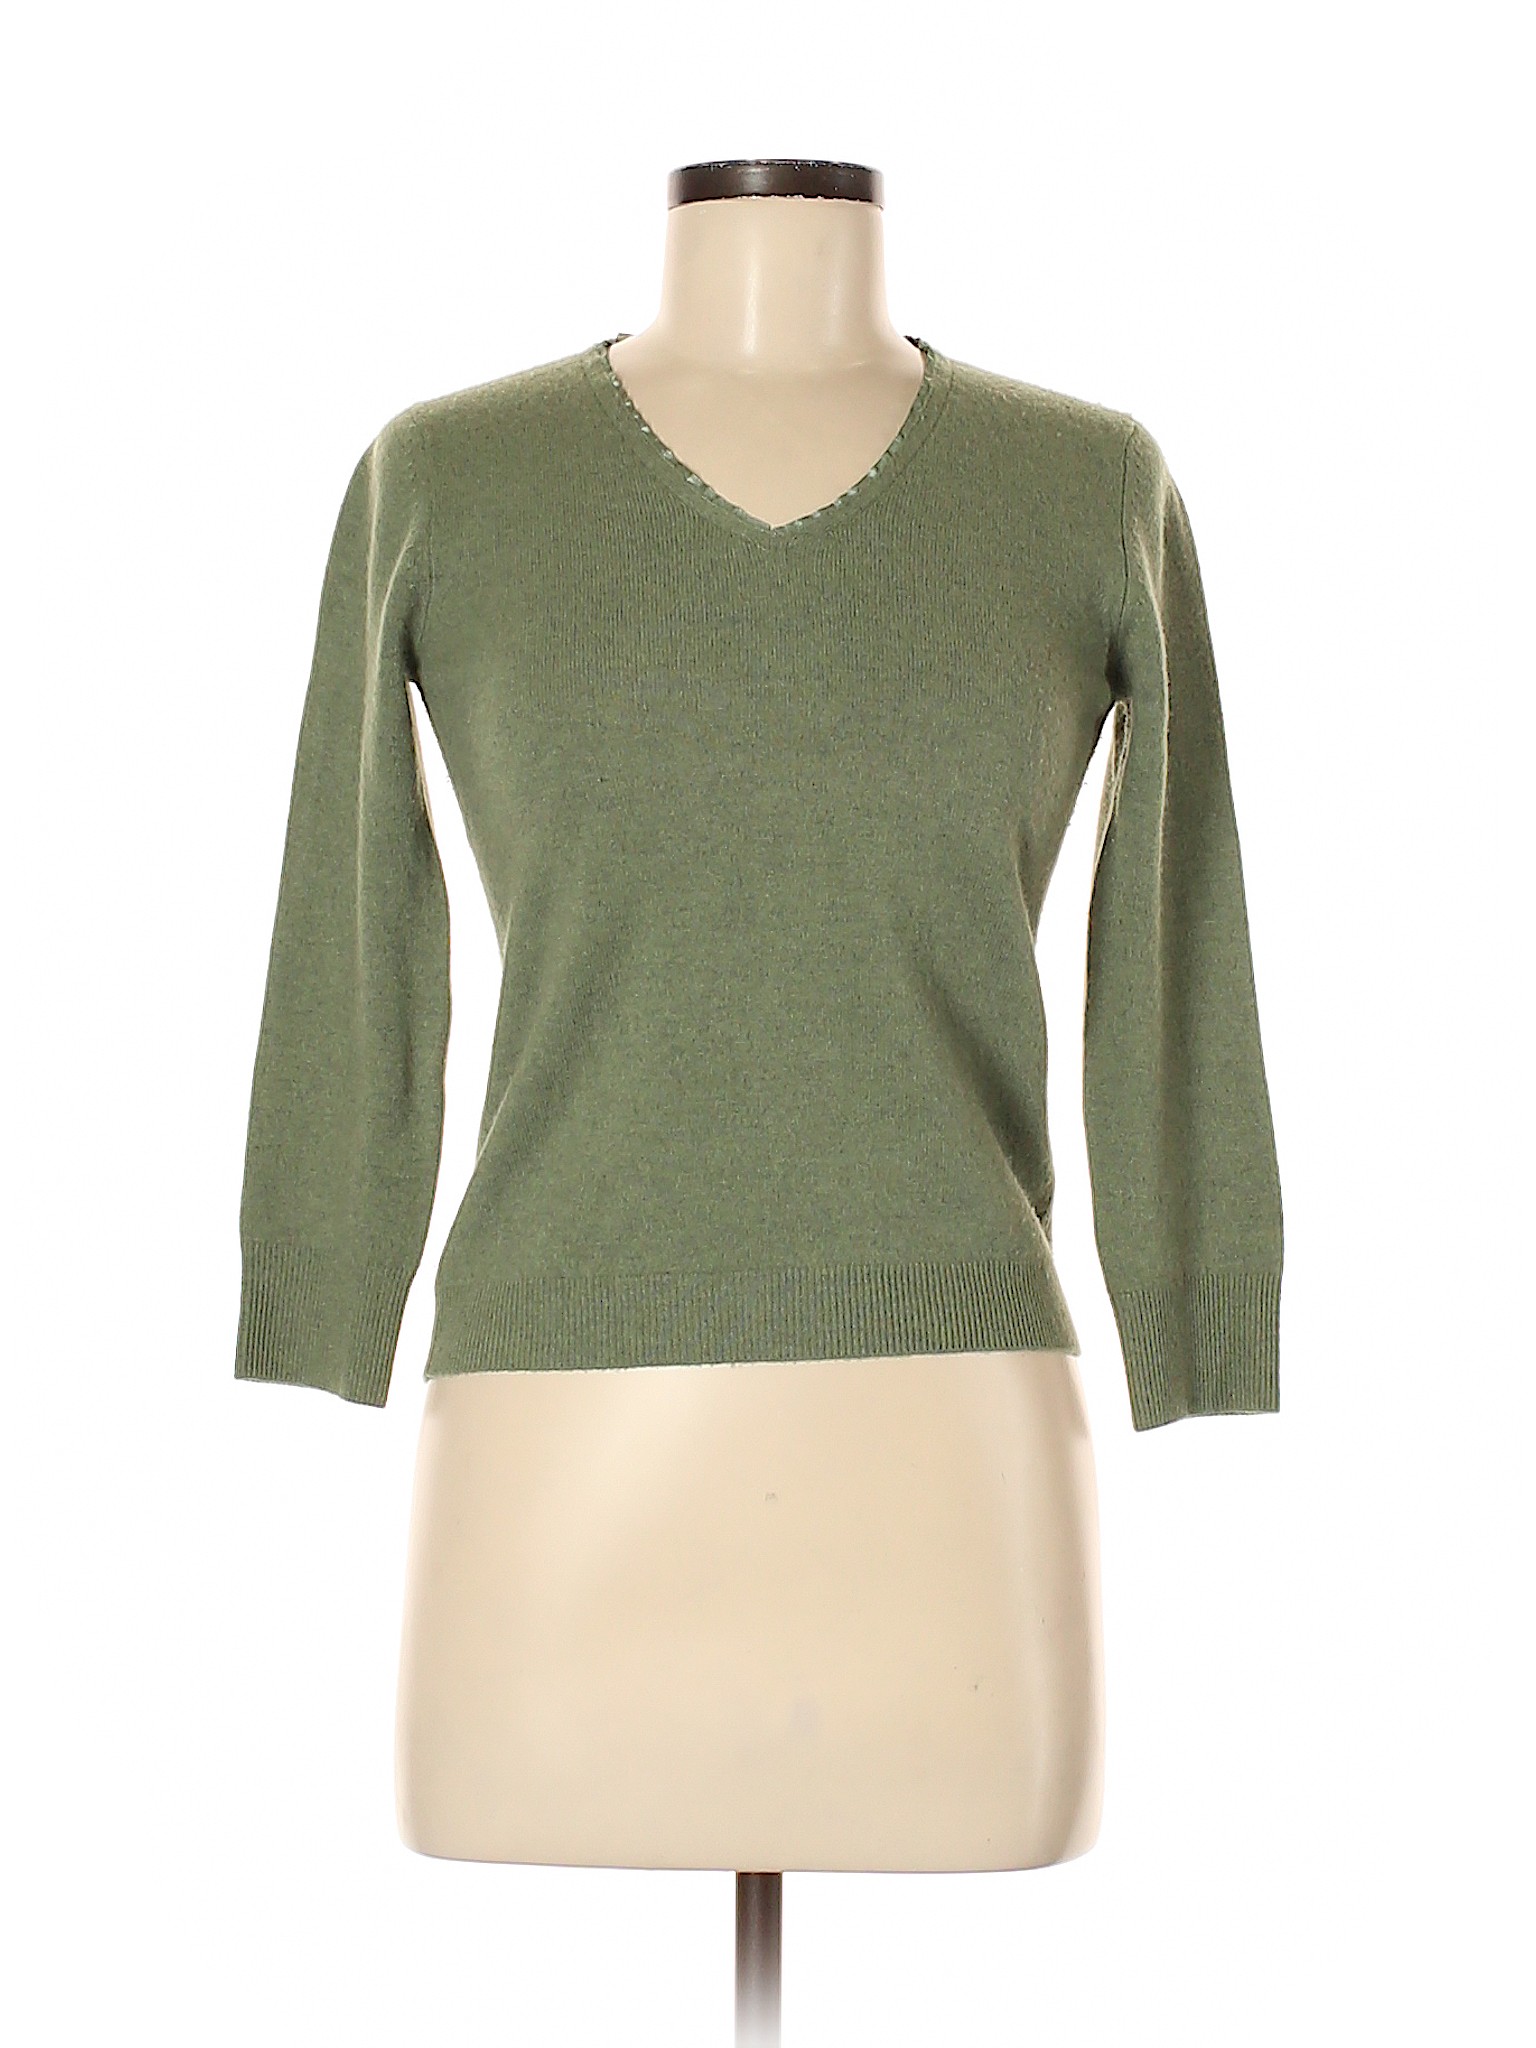 ETRO Solid Green Wool Pullover Sweater Size 42 (IT) - 94% off | thredUP